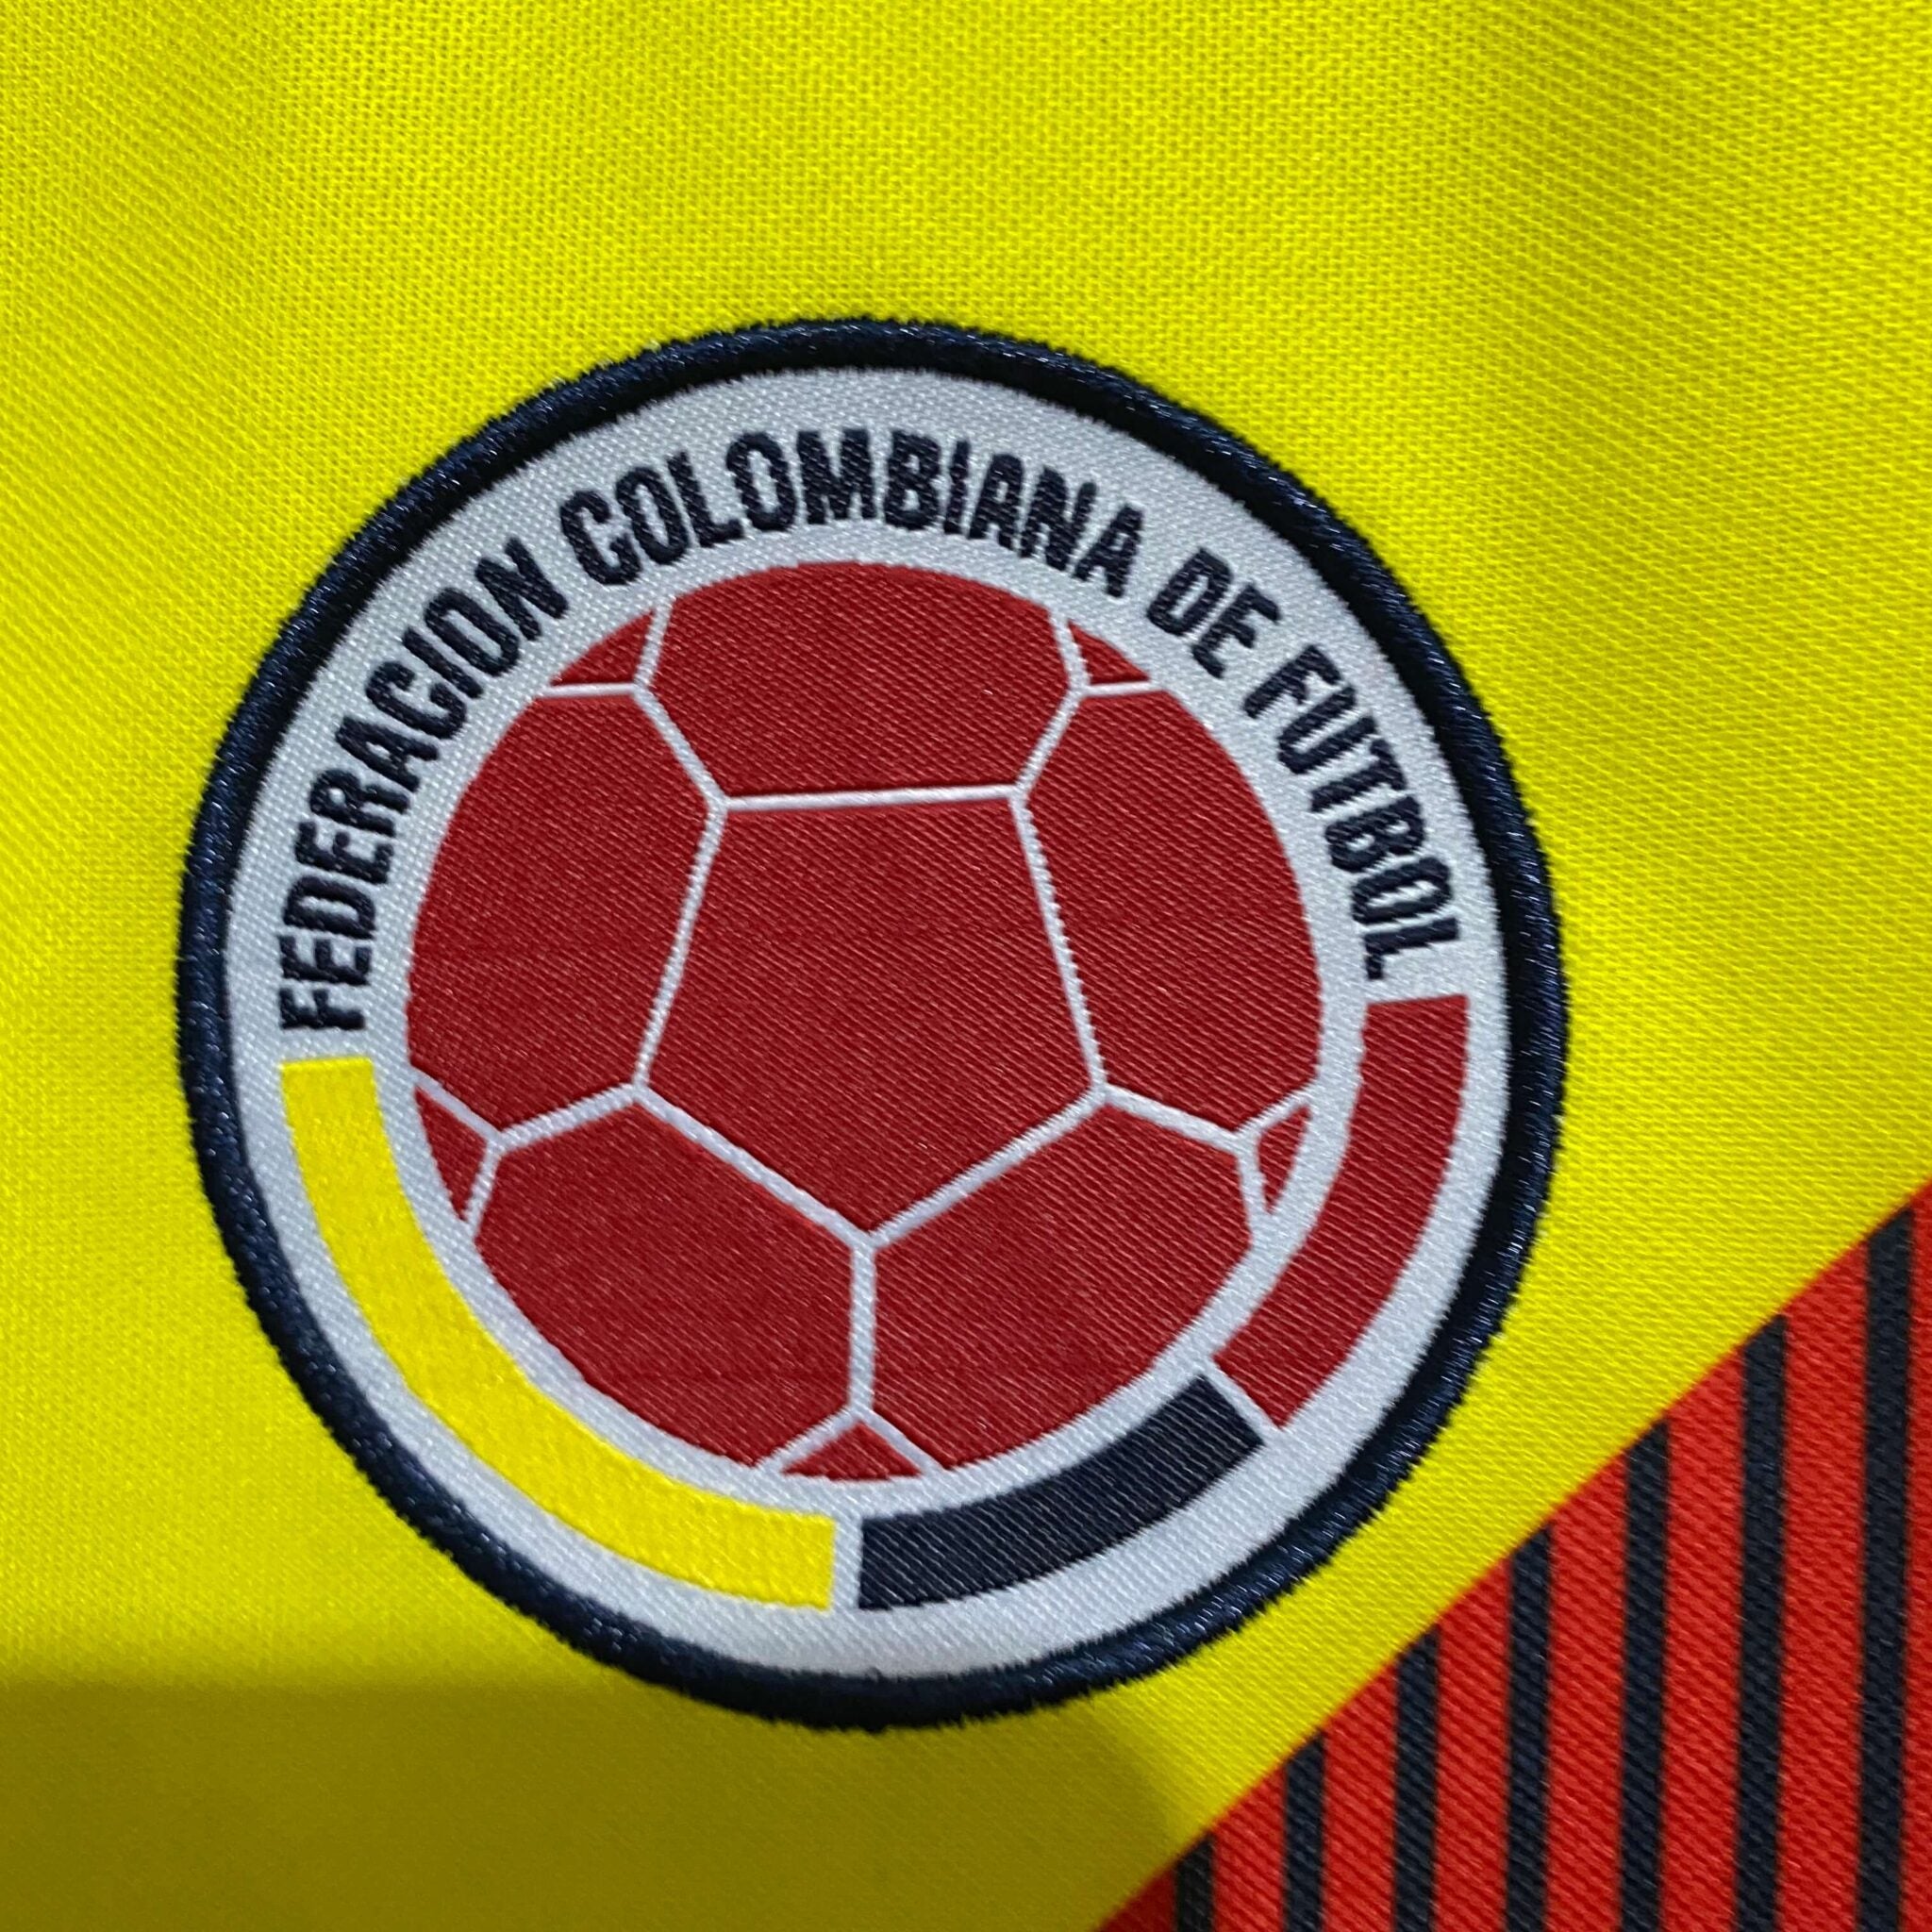 Colombia 2018 Home Kit – The Football Heritage